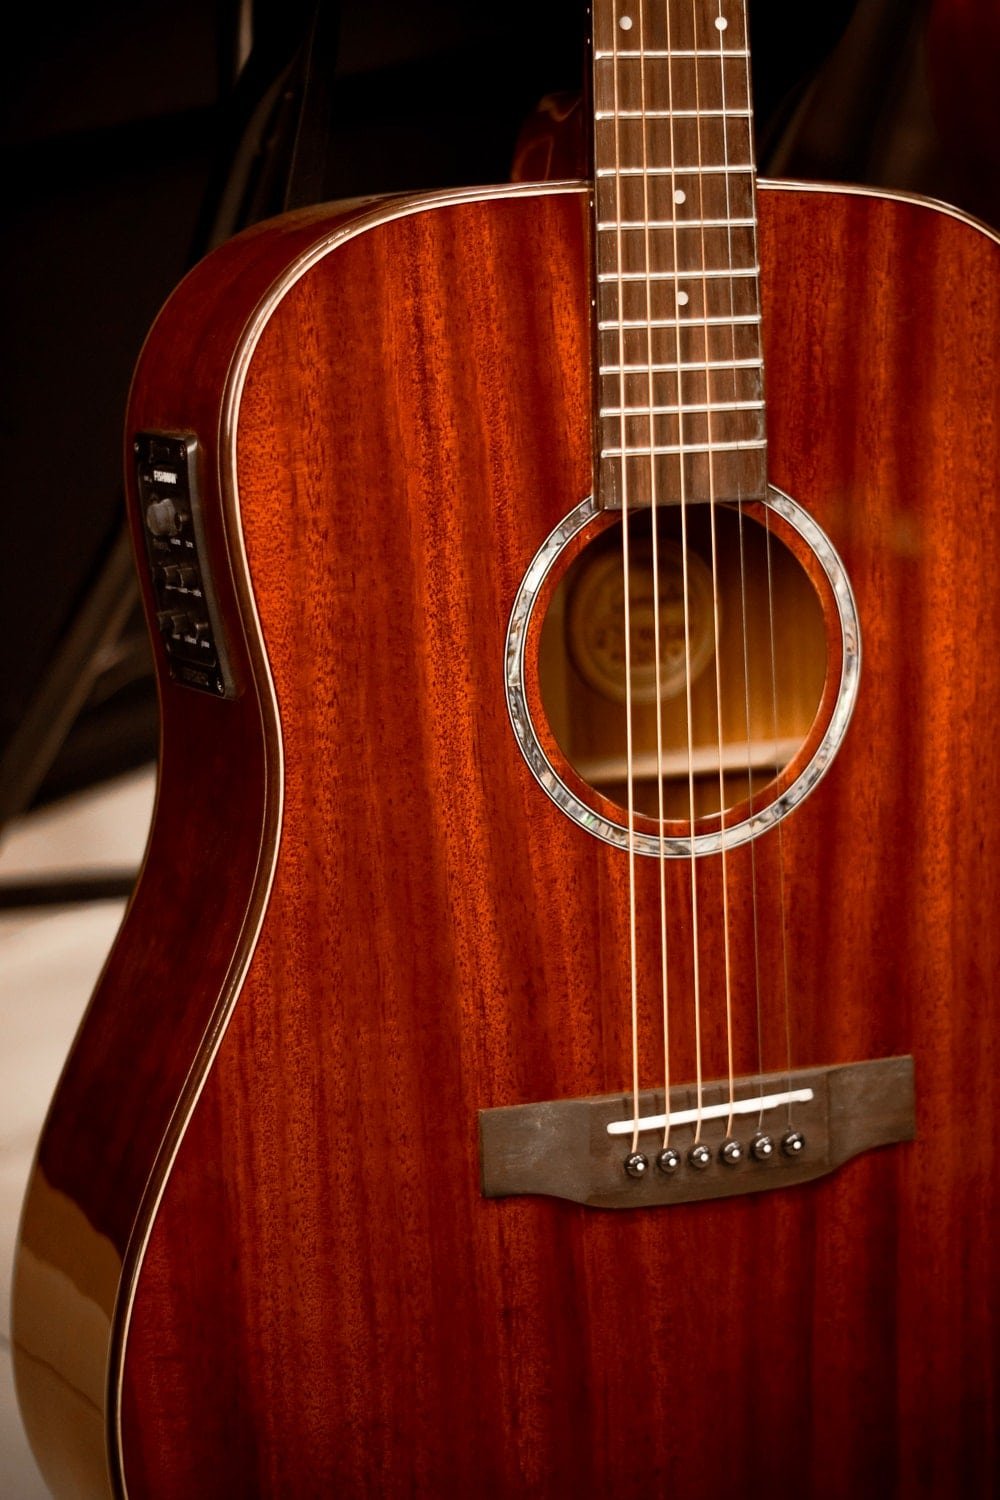 Choosing a String for Your Acoustic Guitar